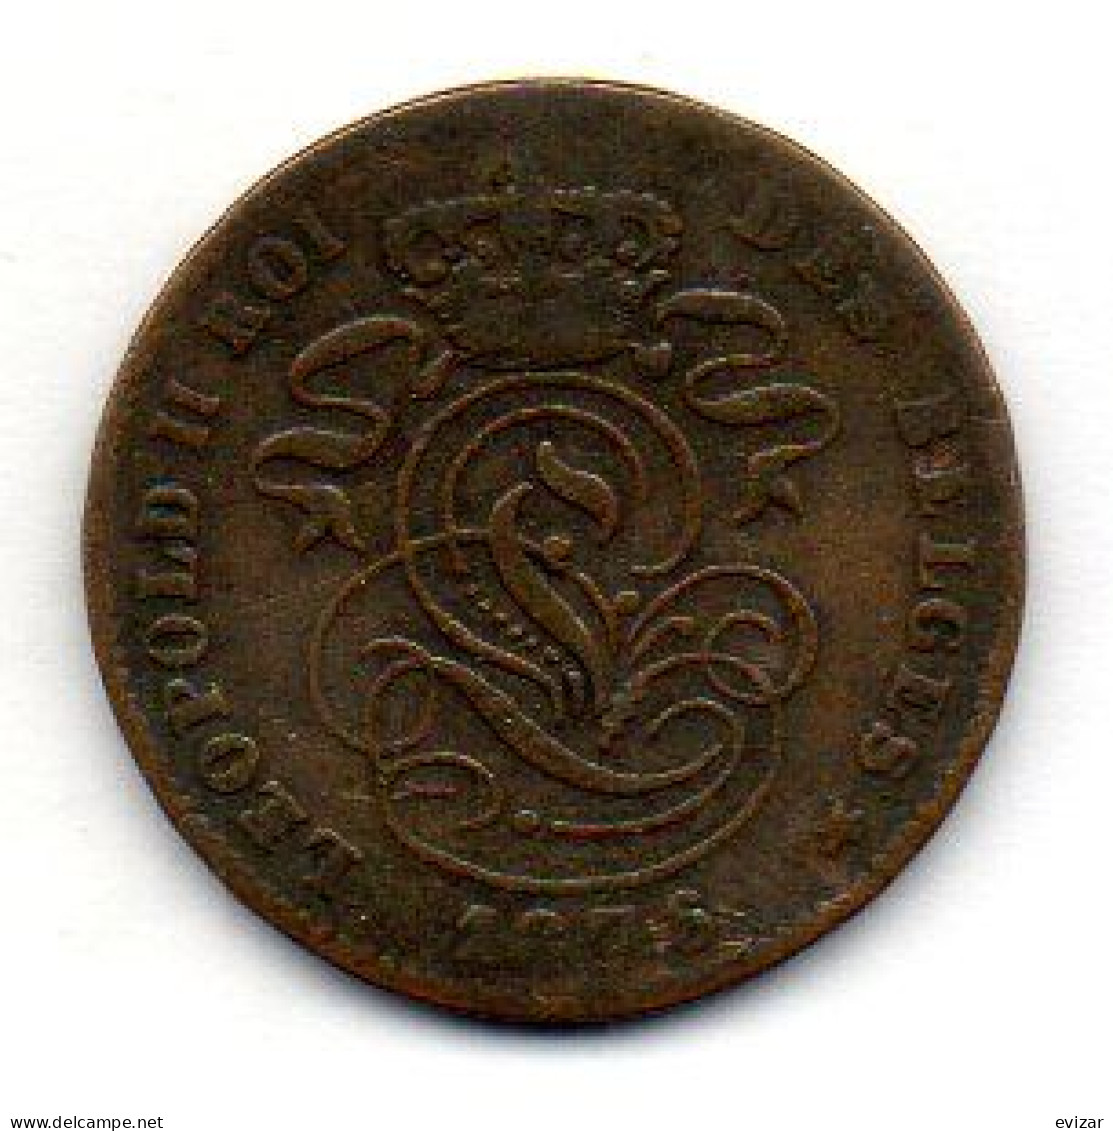 BELGIUM, 2 Centimes, Copper, Year 1876, KM # 35.1, French Legend - 2 Cent